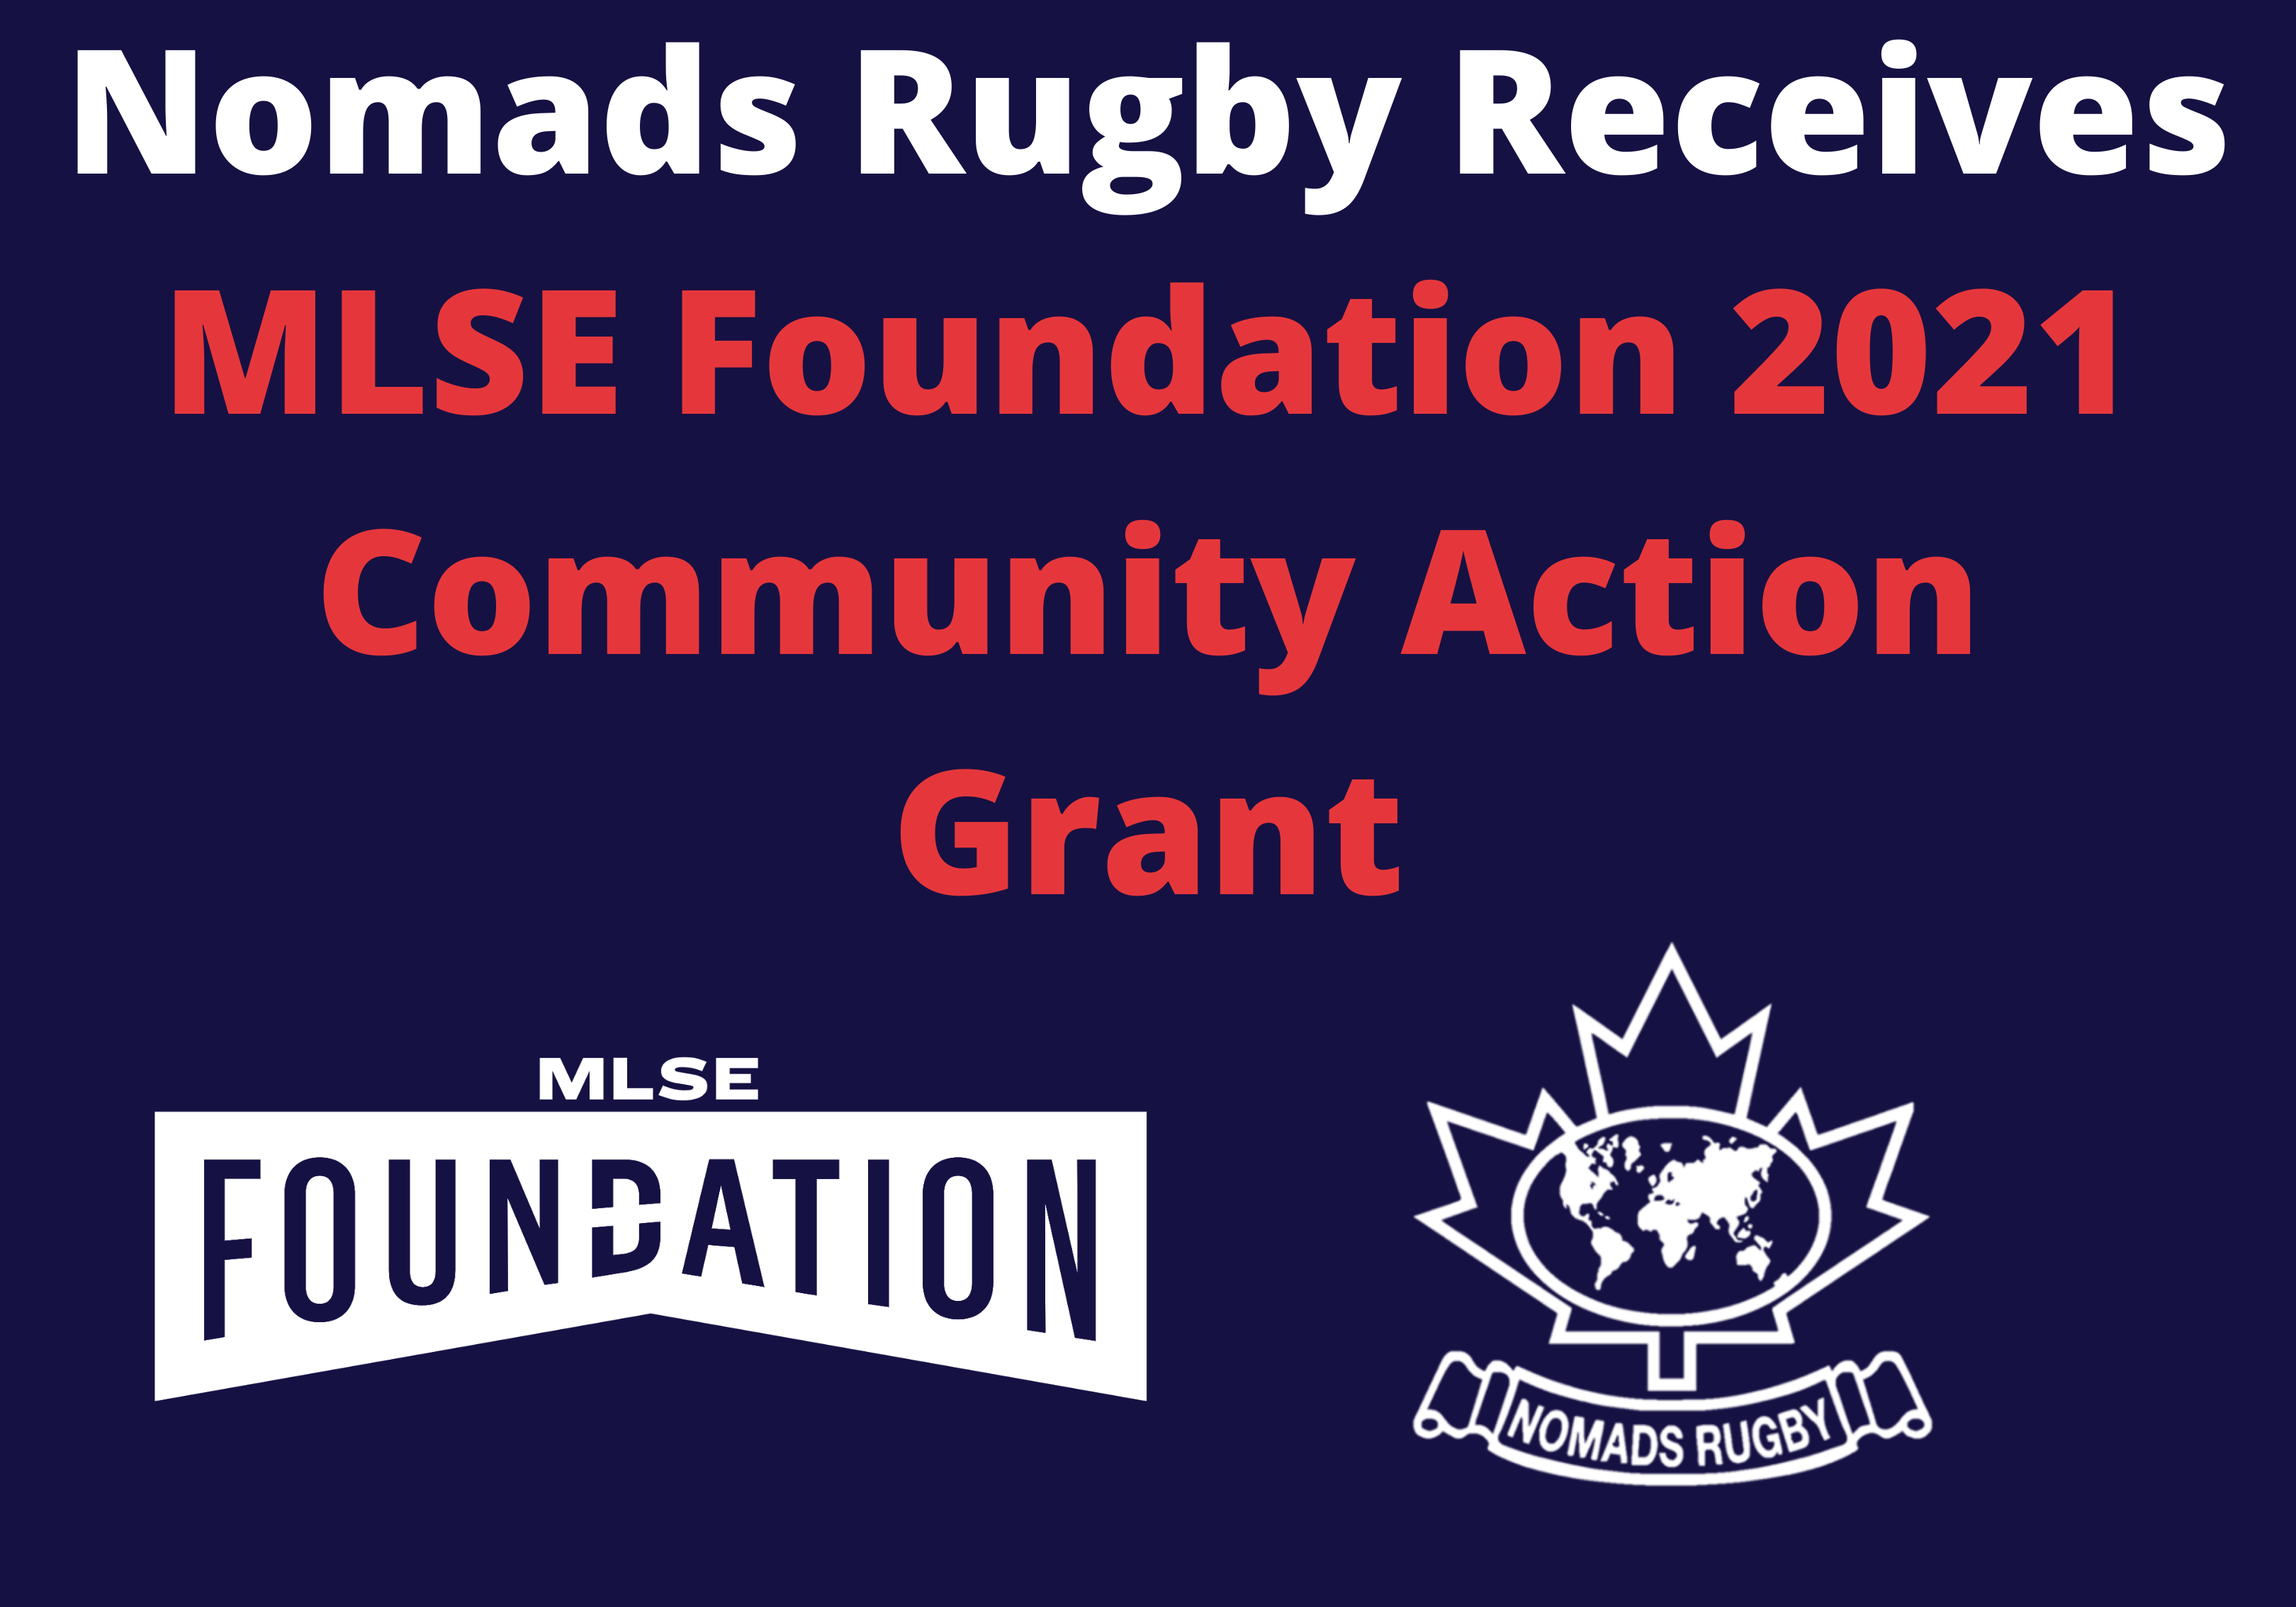 Nomads Rugby Receives MLSE Foundation 2021 Community Action Grant (2)